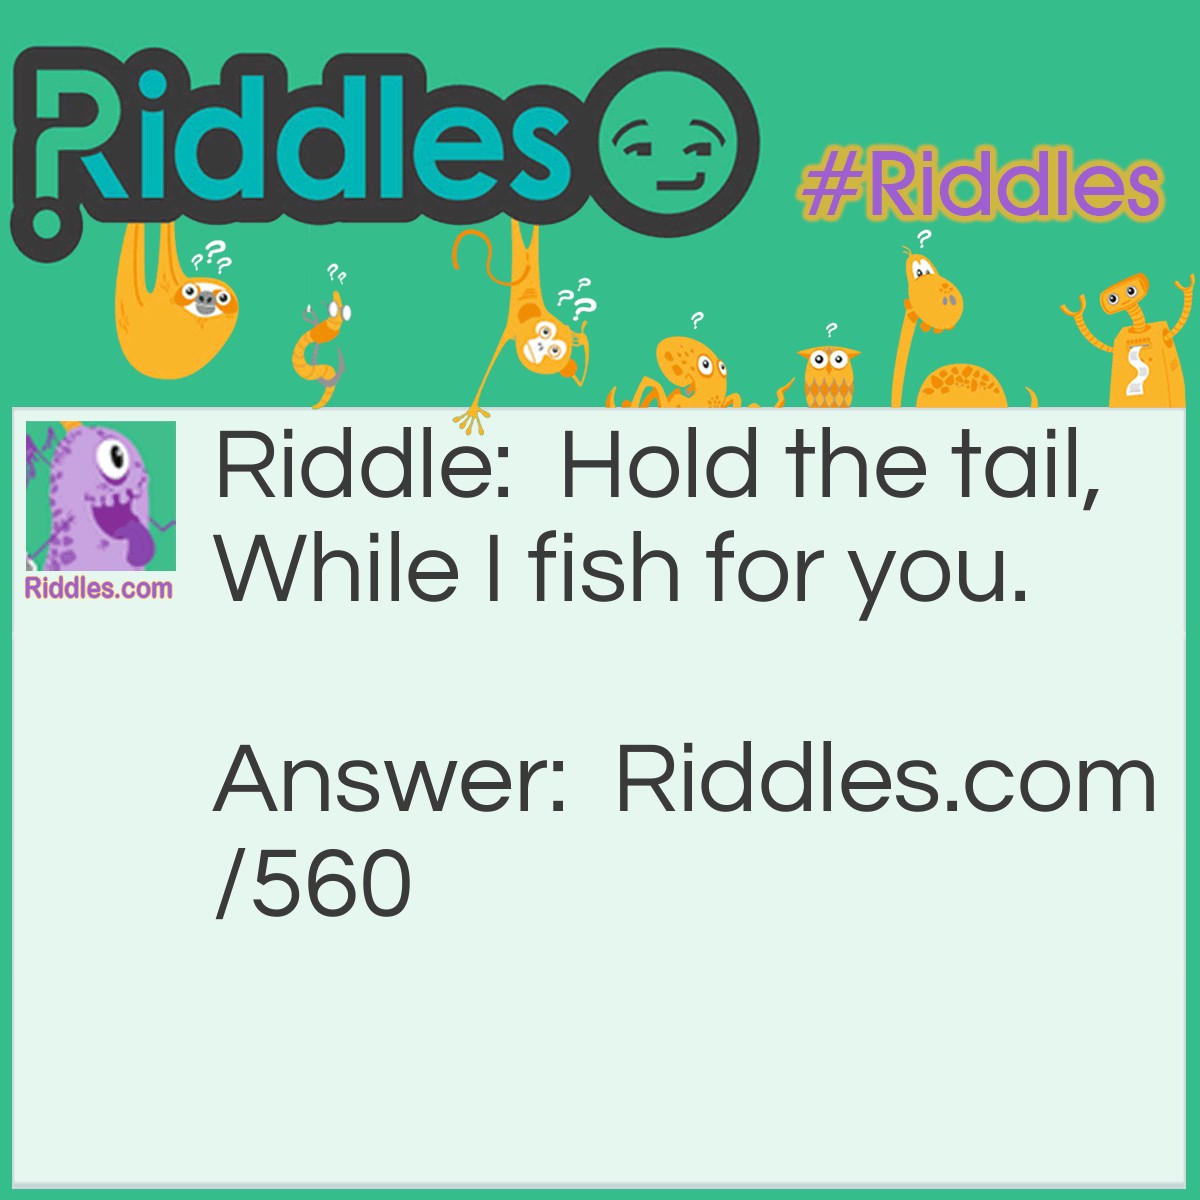 Riddle: Hold the tail, While I fish for you. What am I? Answer: A net.